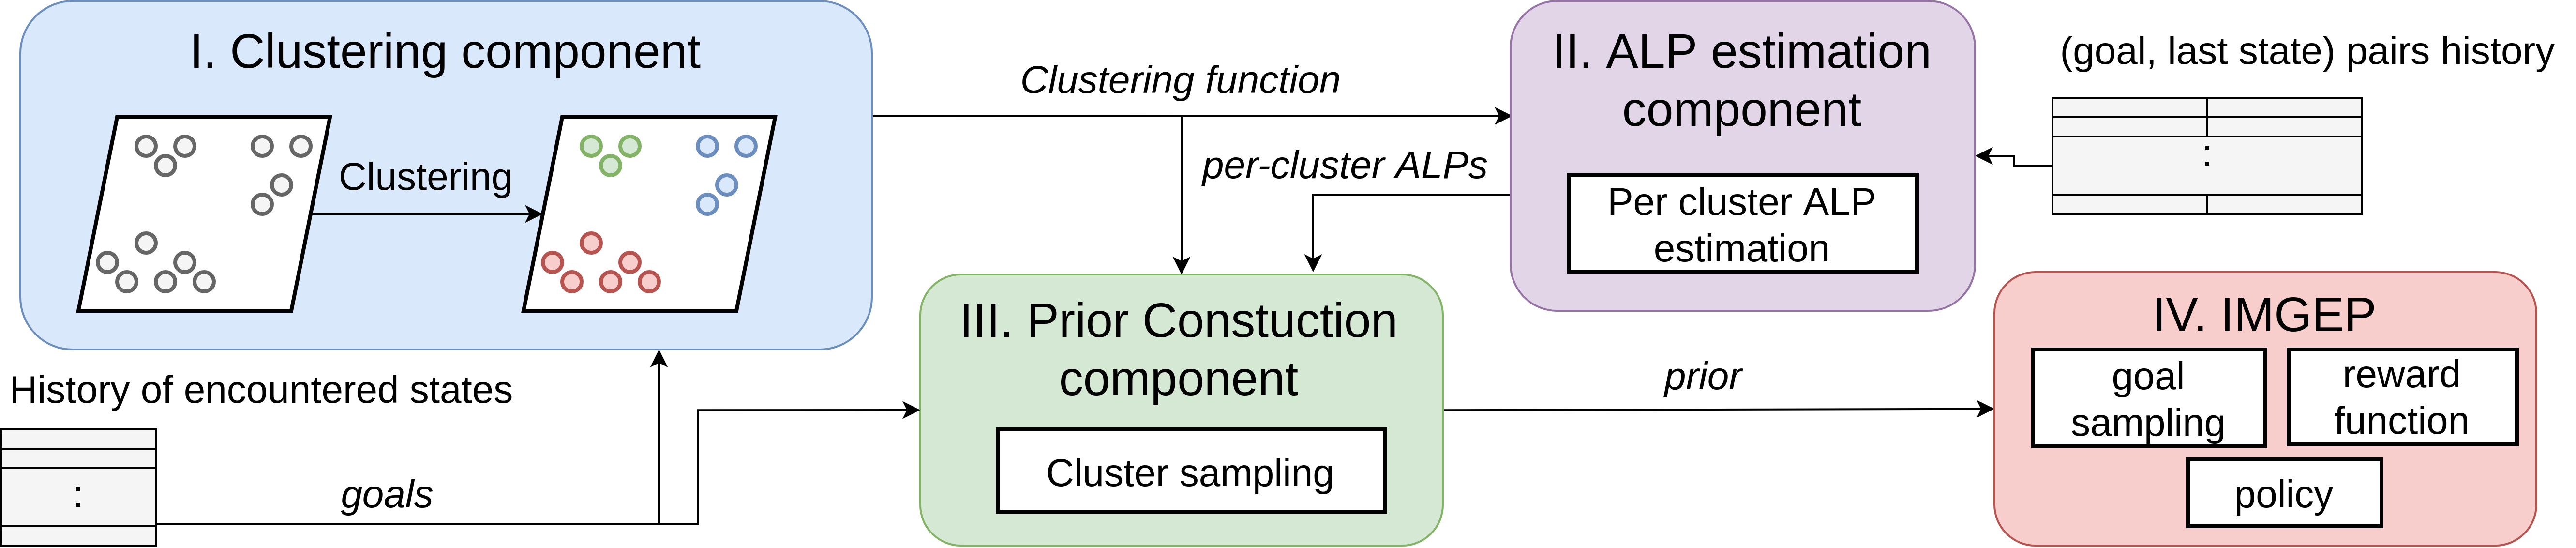 Goal sampling procedure in the GRIMGEP framework.
1) The Clustering component clusters the goal space into different components. In practice, the possible goals are the encountered states, and so clustering is performed on the history of encountered states.
2) ALP Estimation component computes the learning progress of each cluster using the "(goal, last state)" pairs history (the history of all attempted goals and their corresponding outcomes).
3) Prior Construction component samples a cluster using the ALP estimates, and constructs the goal sampling prior as the masking distribution assigning uniform probability over goals inside the sampled cluster (uniform over all the goals in the history of encountered states that the clustering function would assign to this cluster)
and 0 probability to goals outside the cluster.
4) The Underlying IMGEP samples a goal from the distribution formed by combining the goal prior and the underlying IMGEP's novelty-based goal sampling distribution: a novel looking goal is sampled from the sampled cluster.